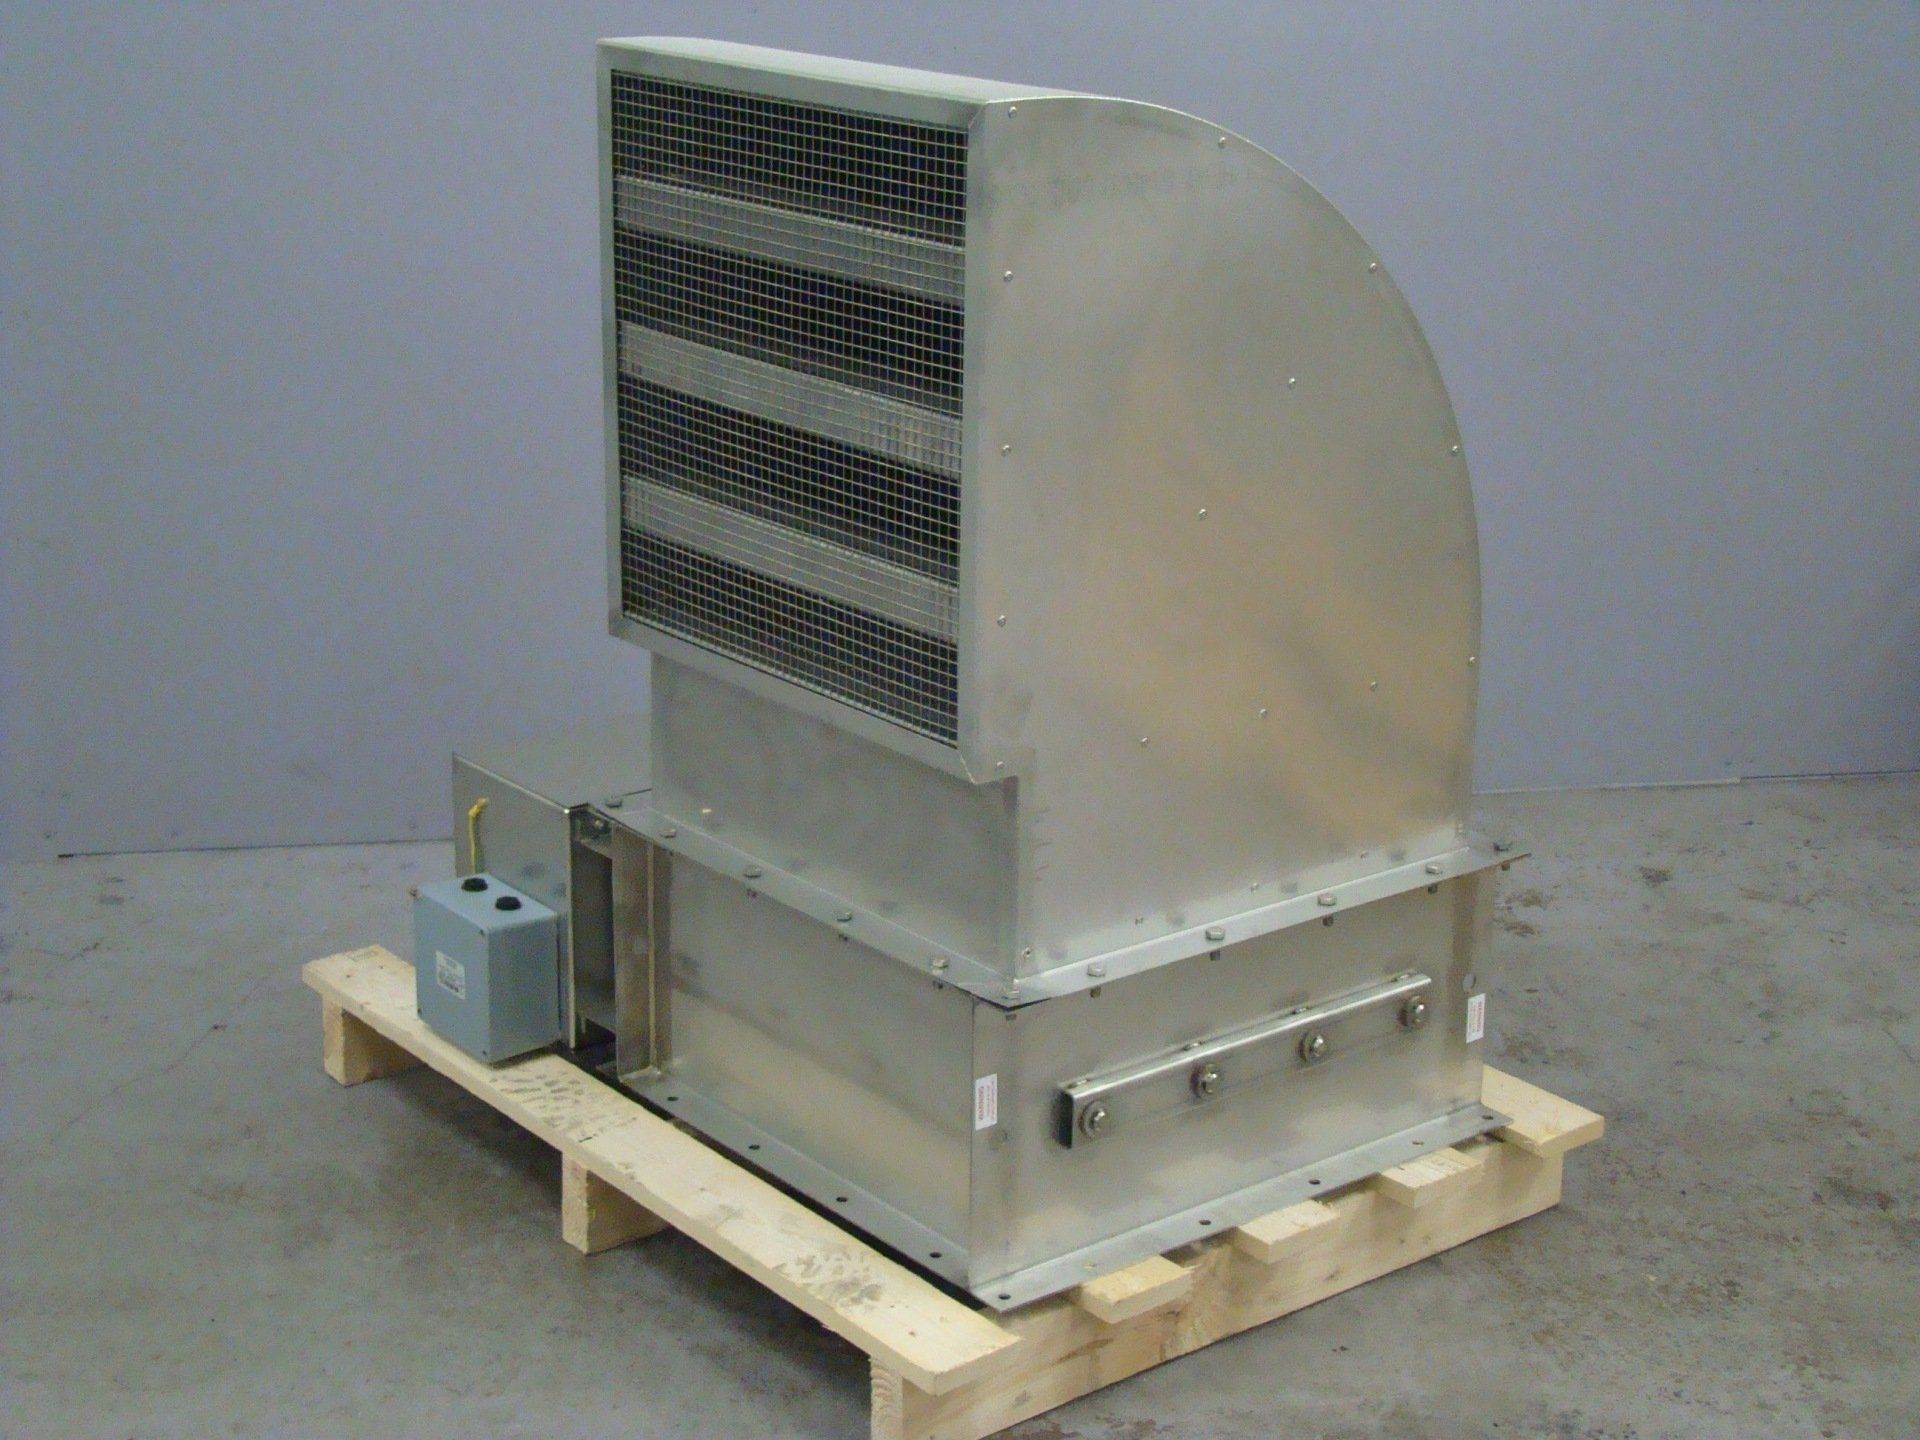 a fan extraction vent